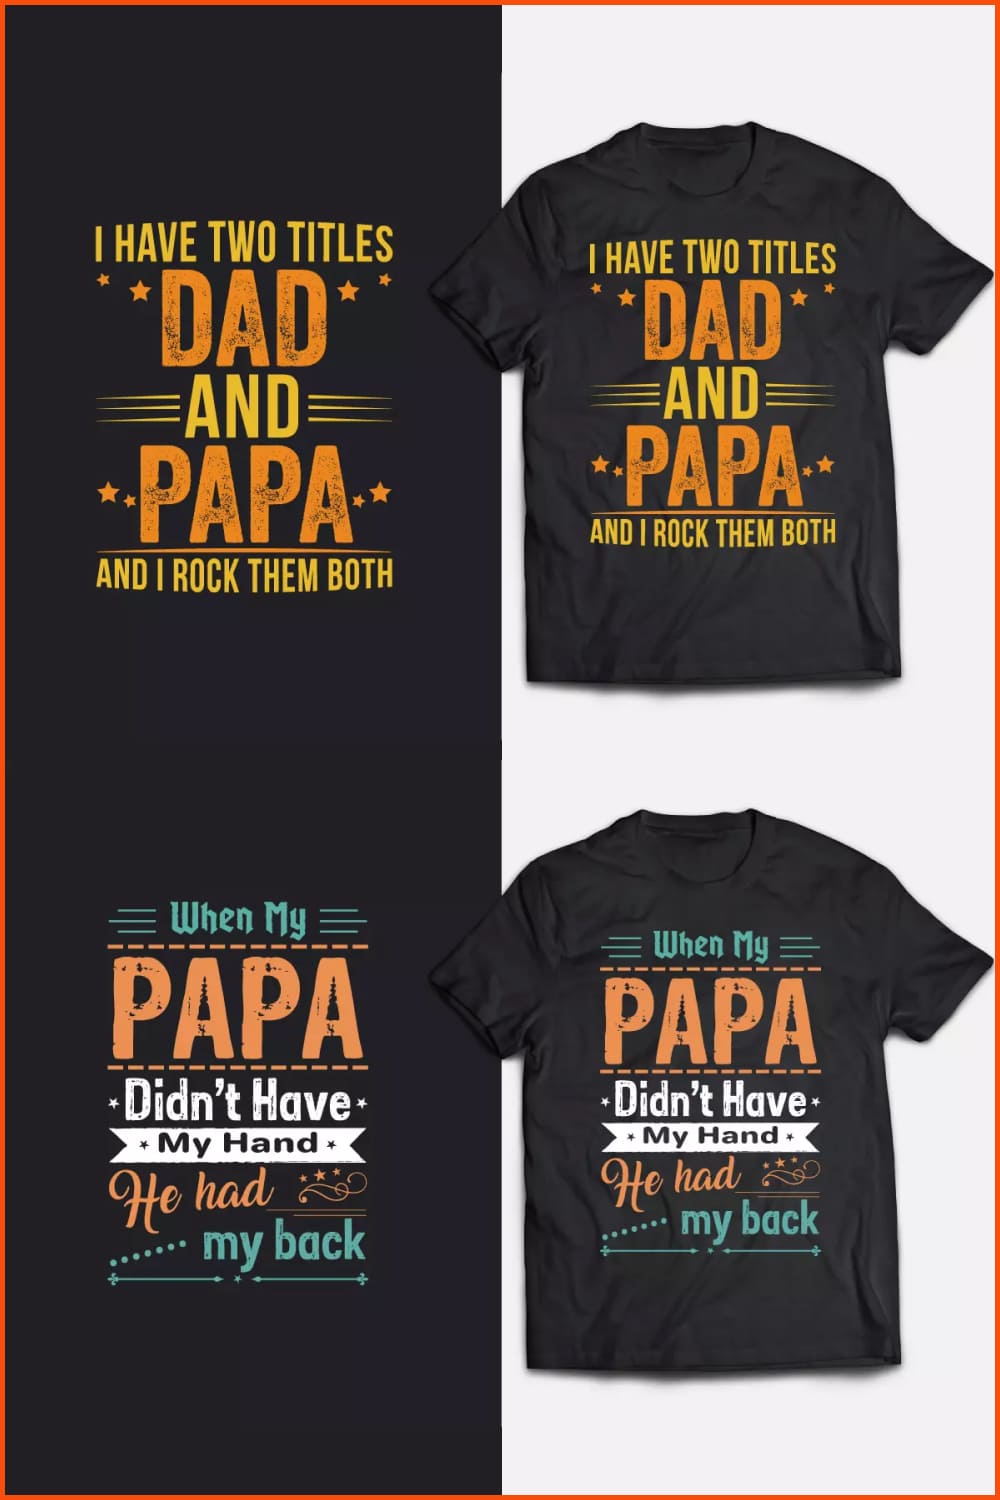 Collage of multi-colored inscriptions about dad on black t-shirts.